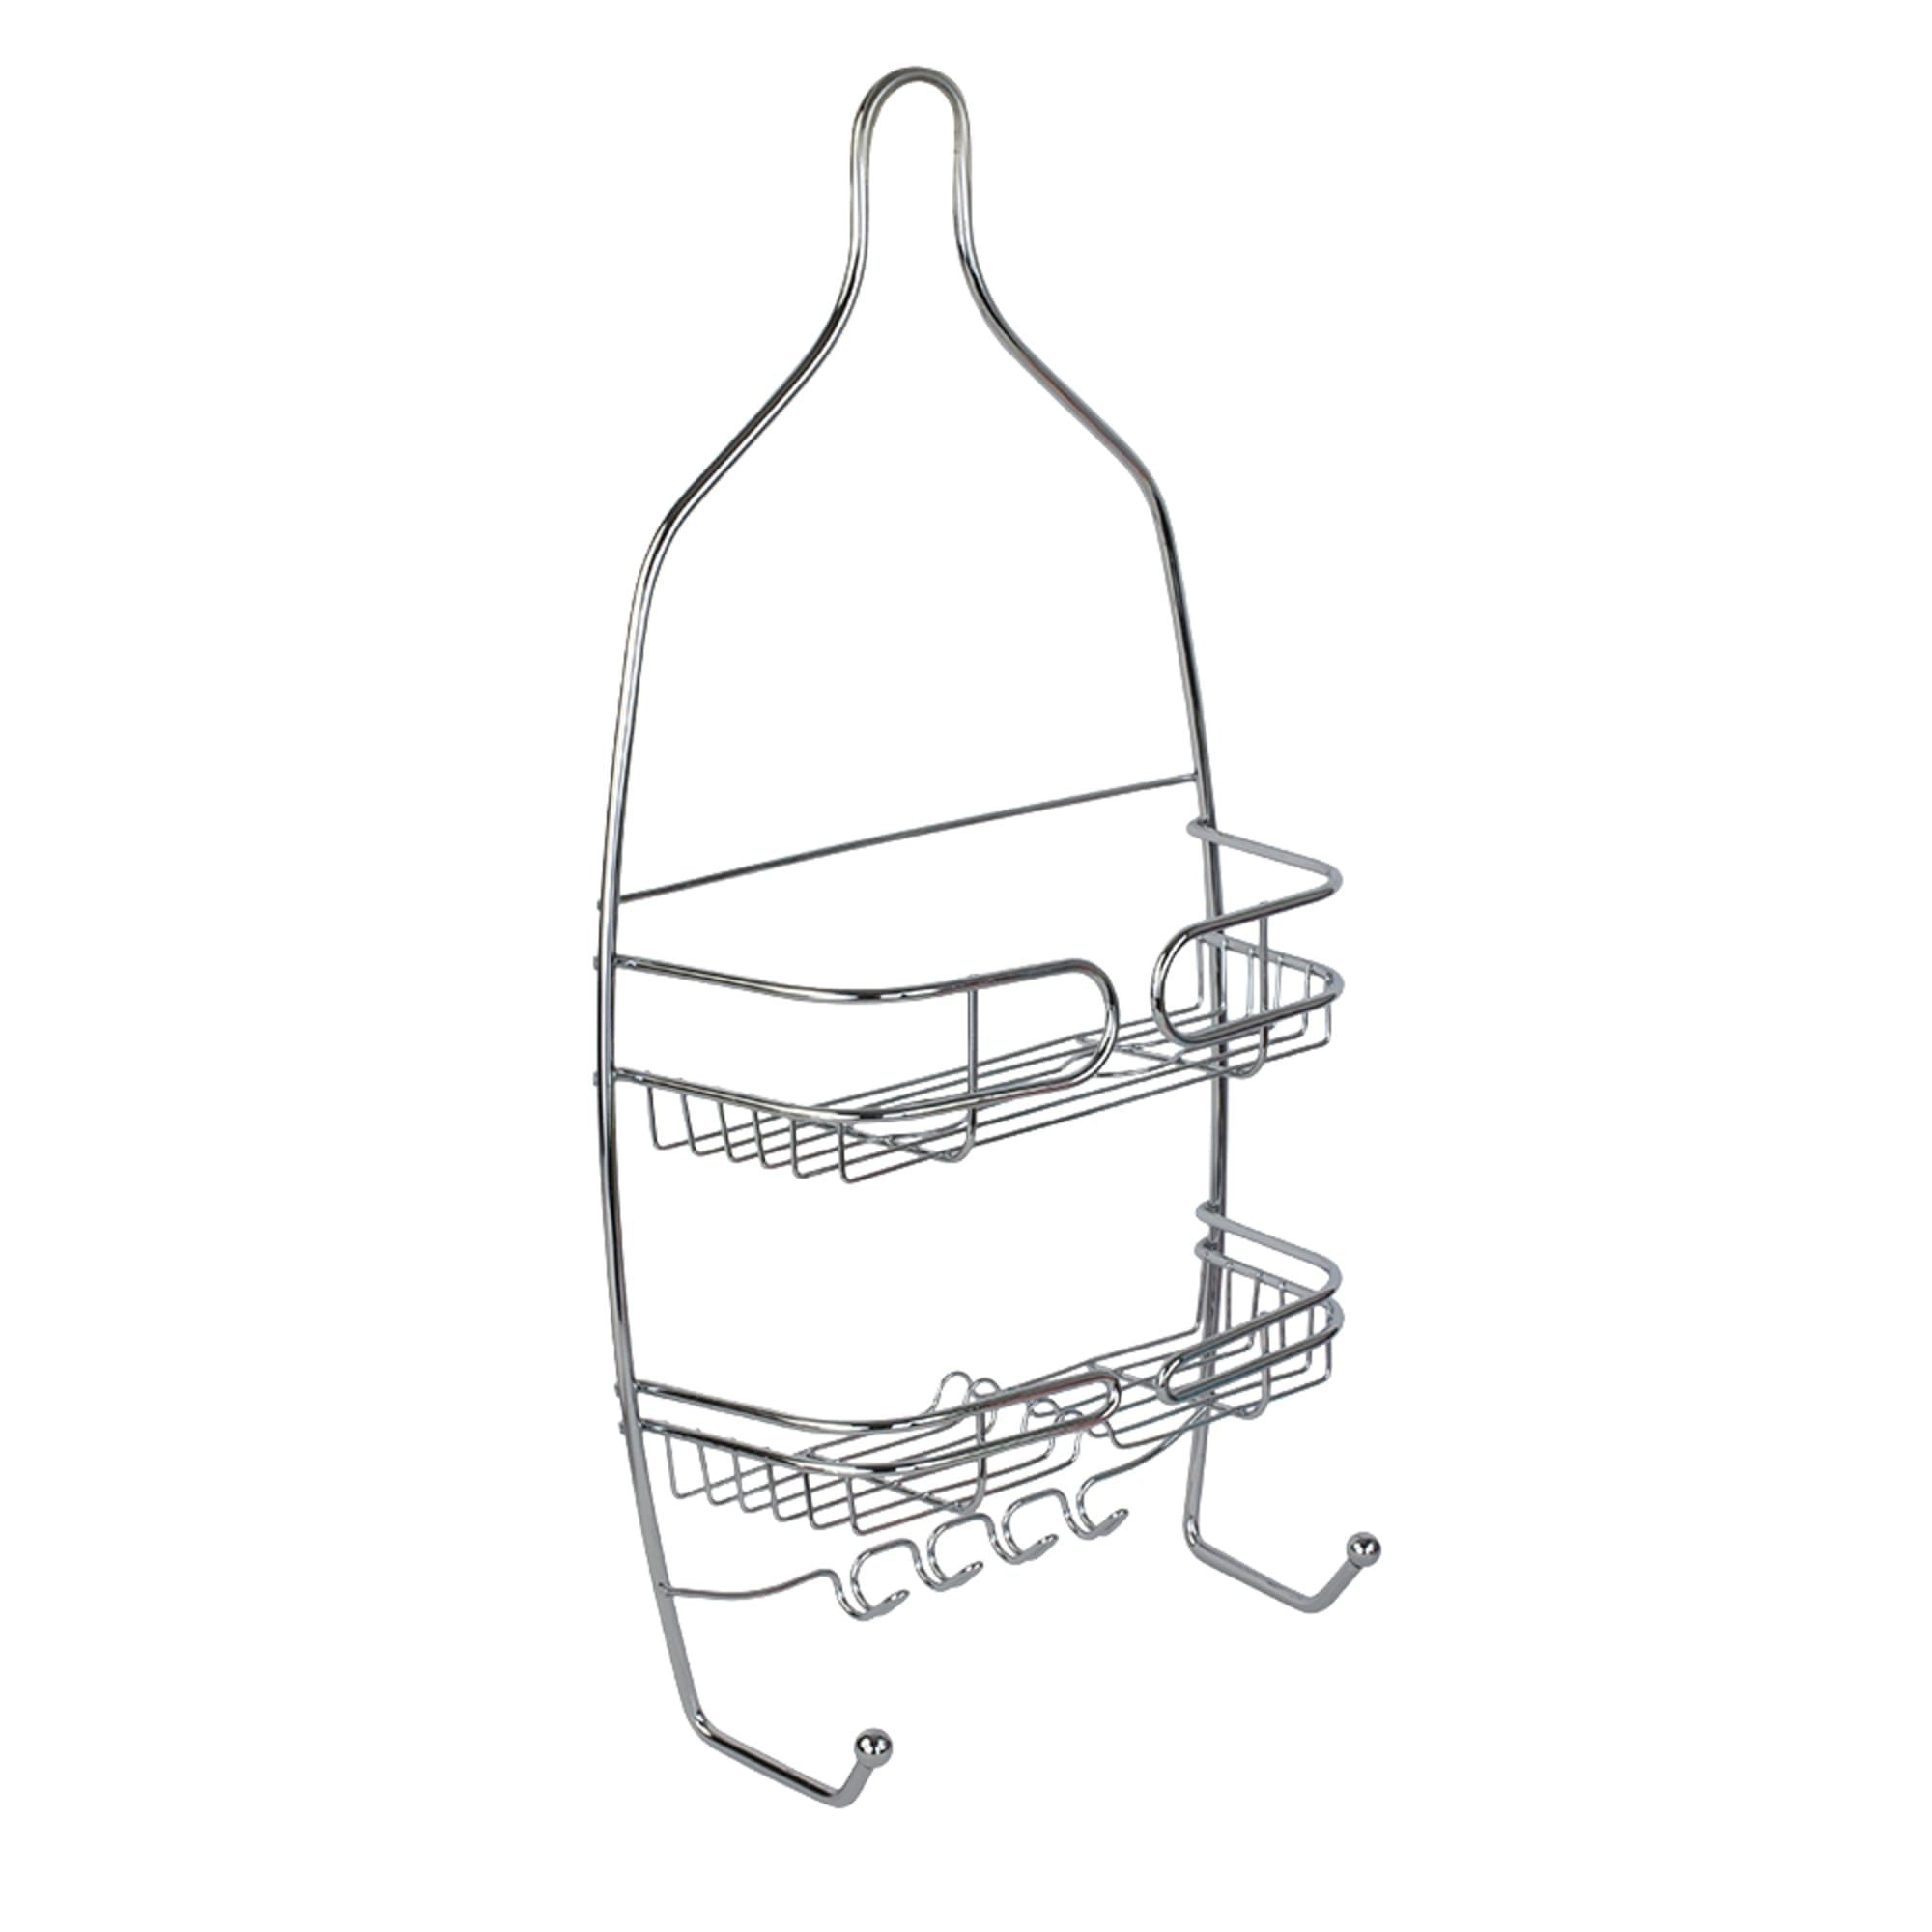 Home Basics Chrome Plated Steel Shower Caddy $8.00 EACH, CASE PACK OF 12